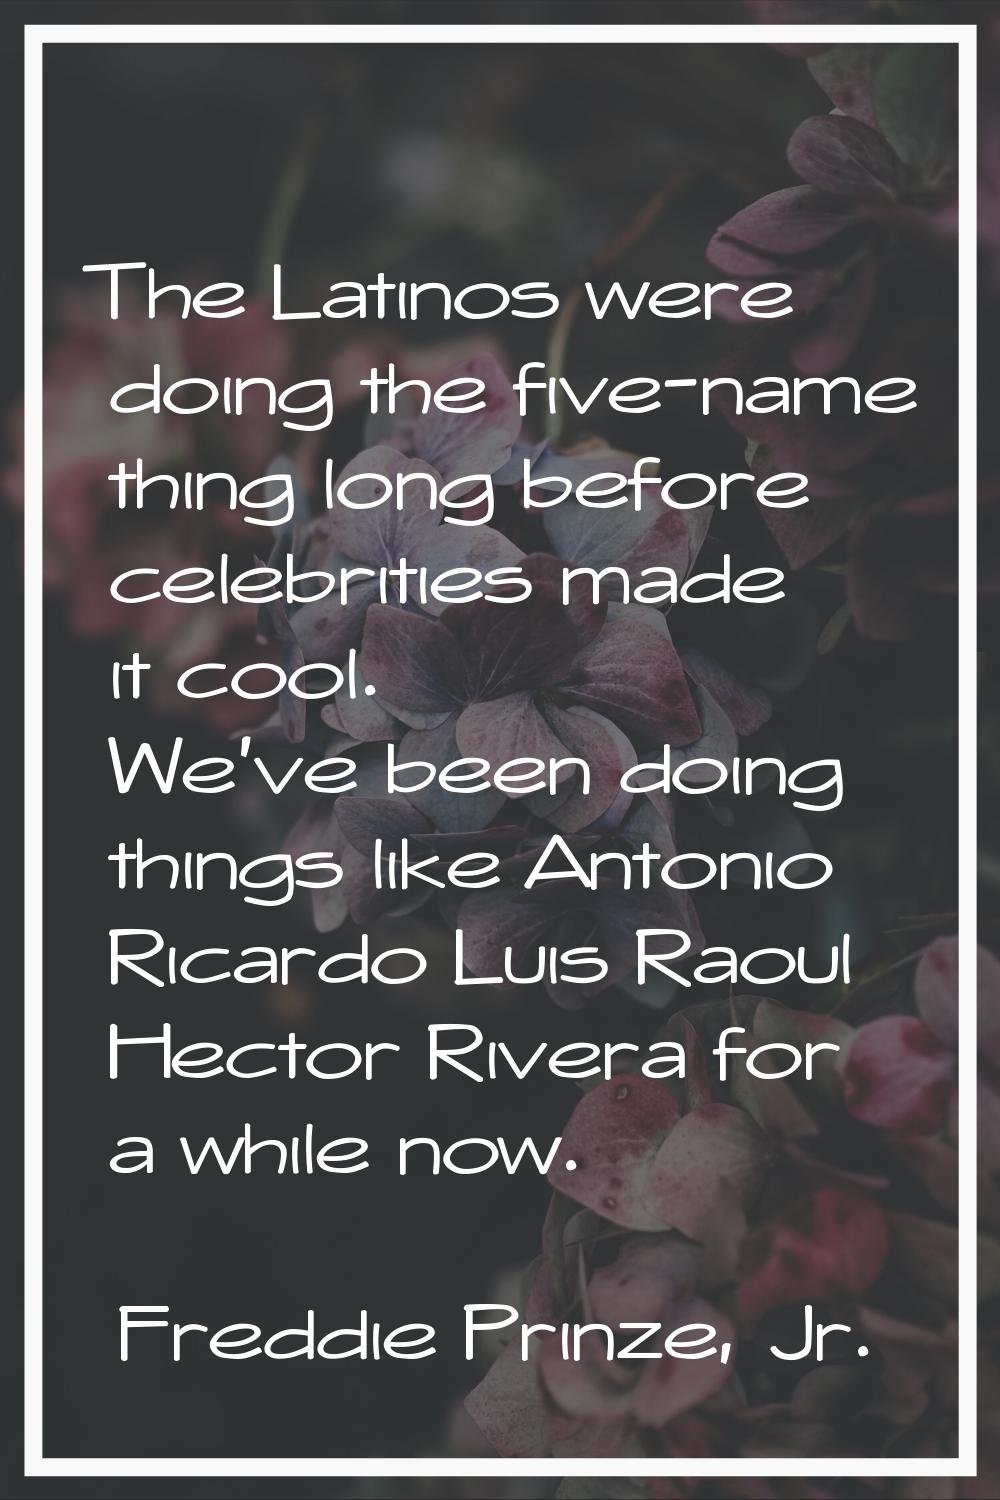 The Latinos were doing the five-name thing long before celebrities made it cool. We've been doing t